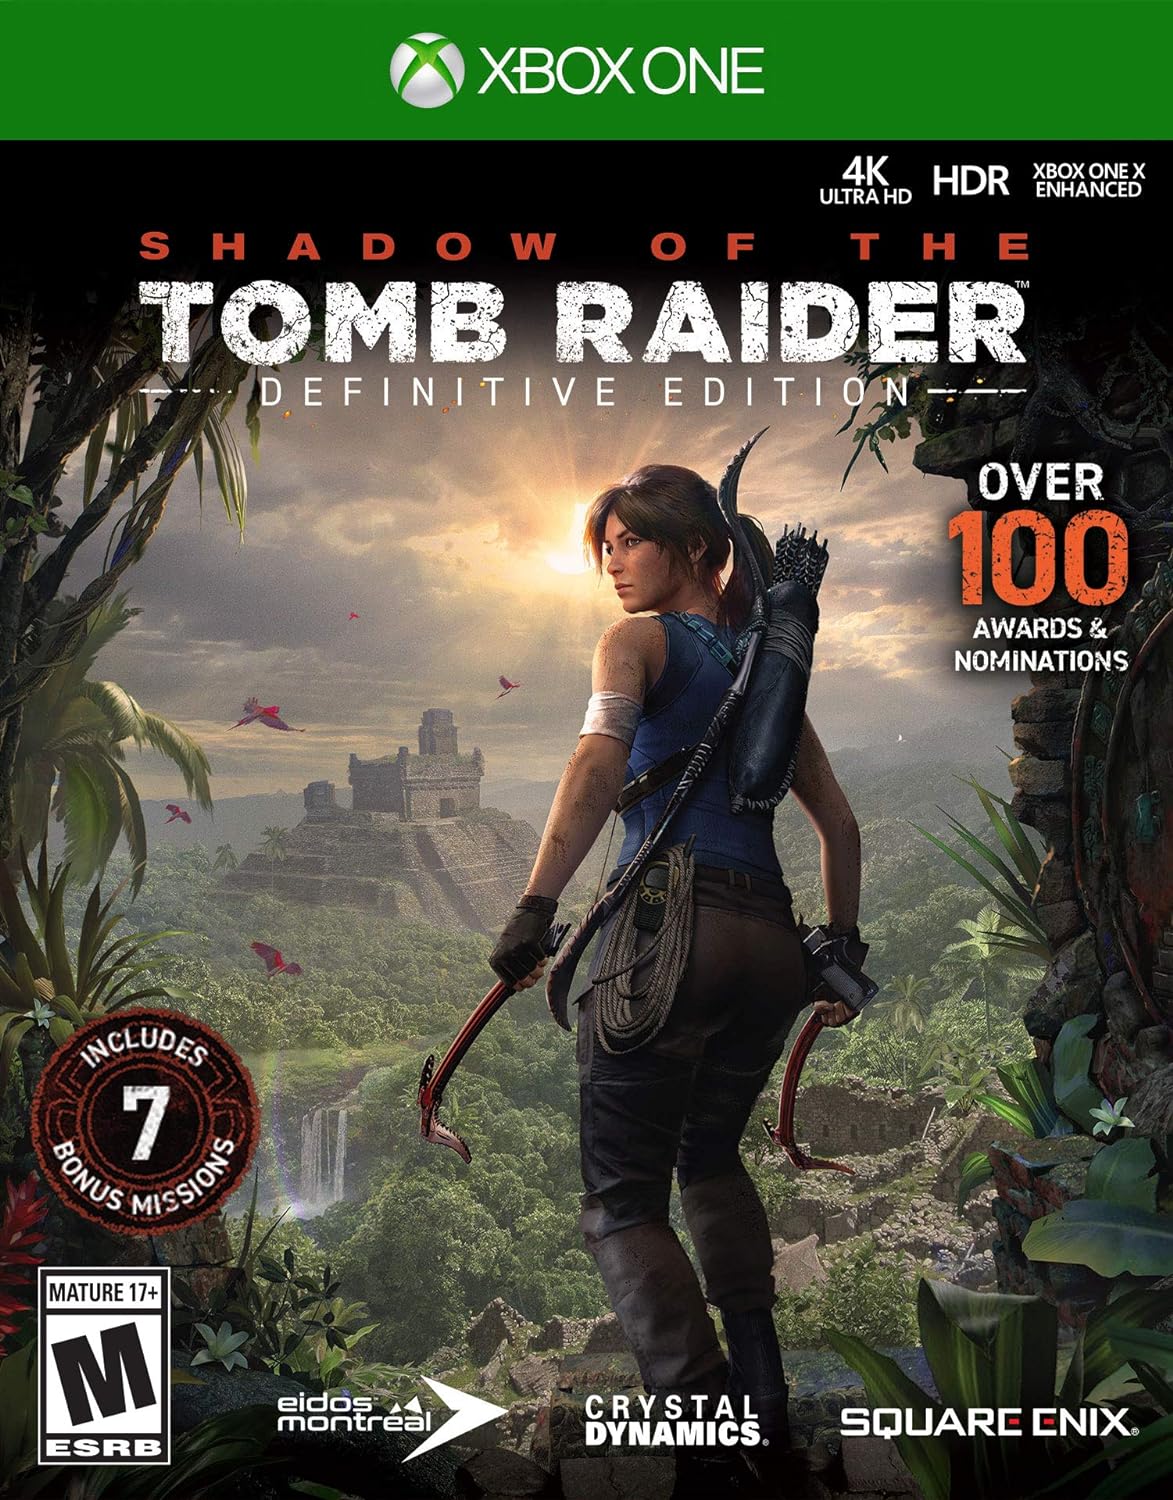 Xbox-One-Shadow-of-tomb-raider-tech-junction-store